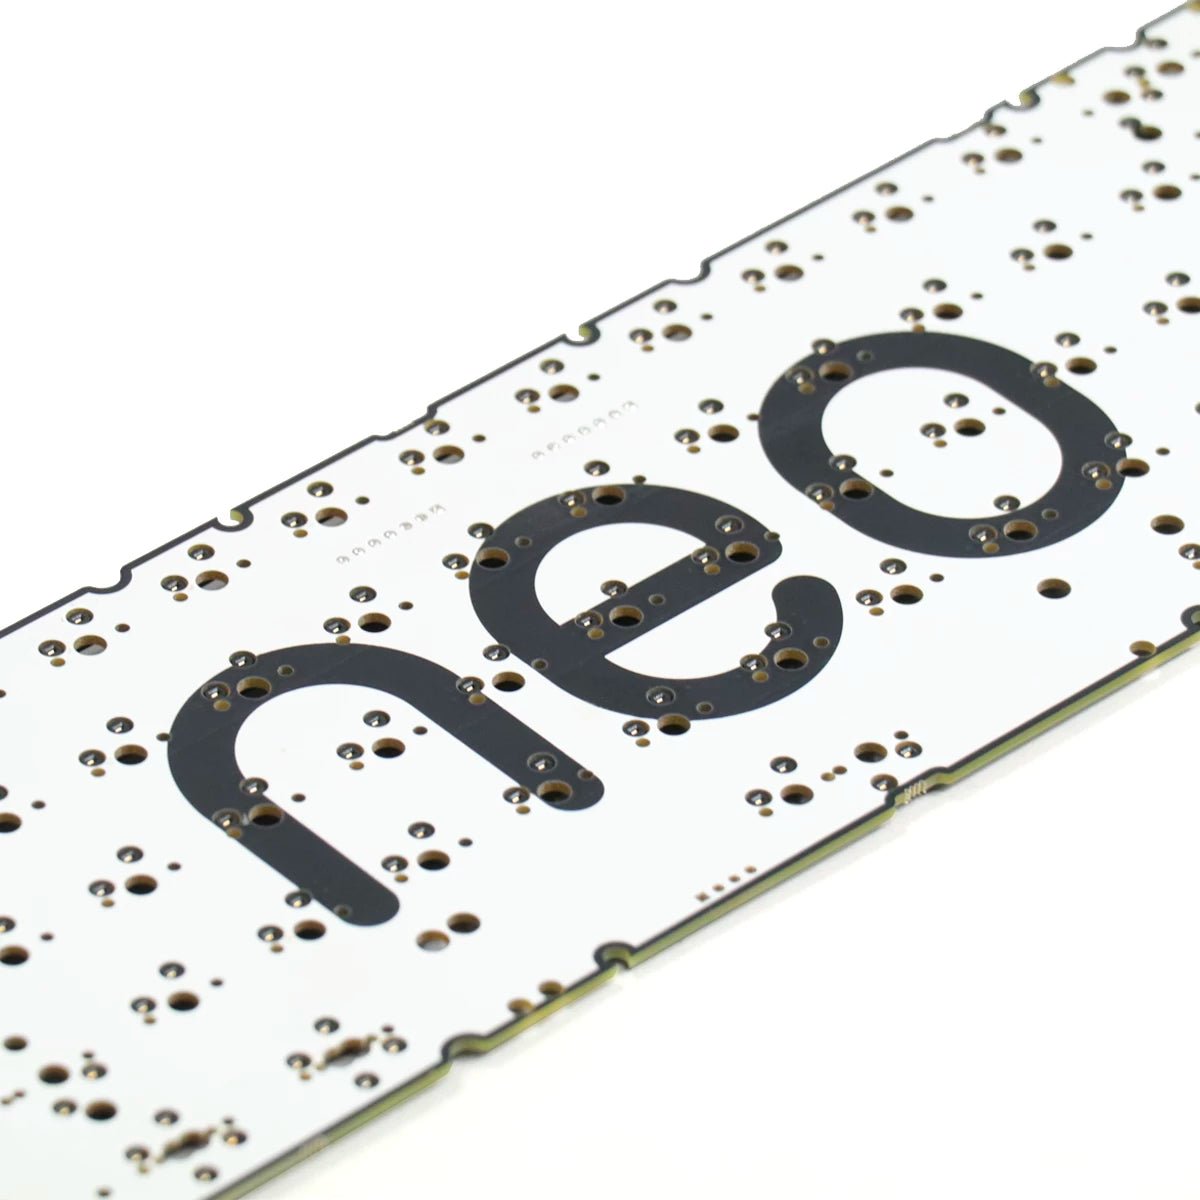 Qwertykeys Neo70 PCB